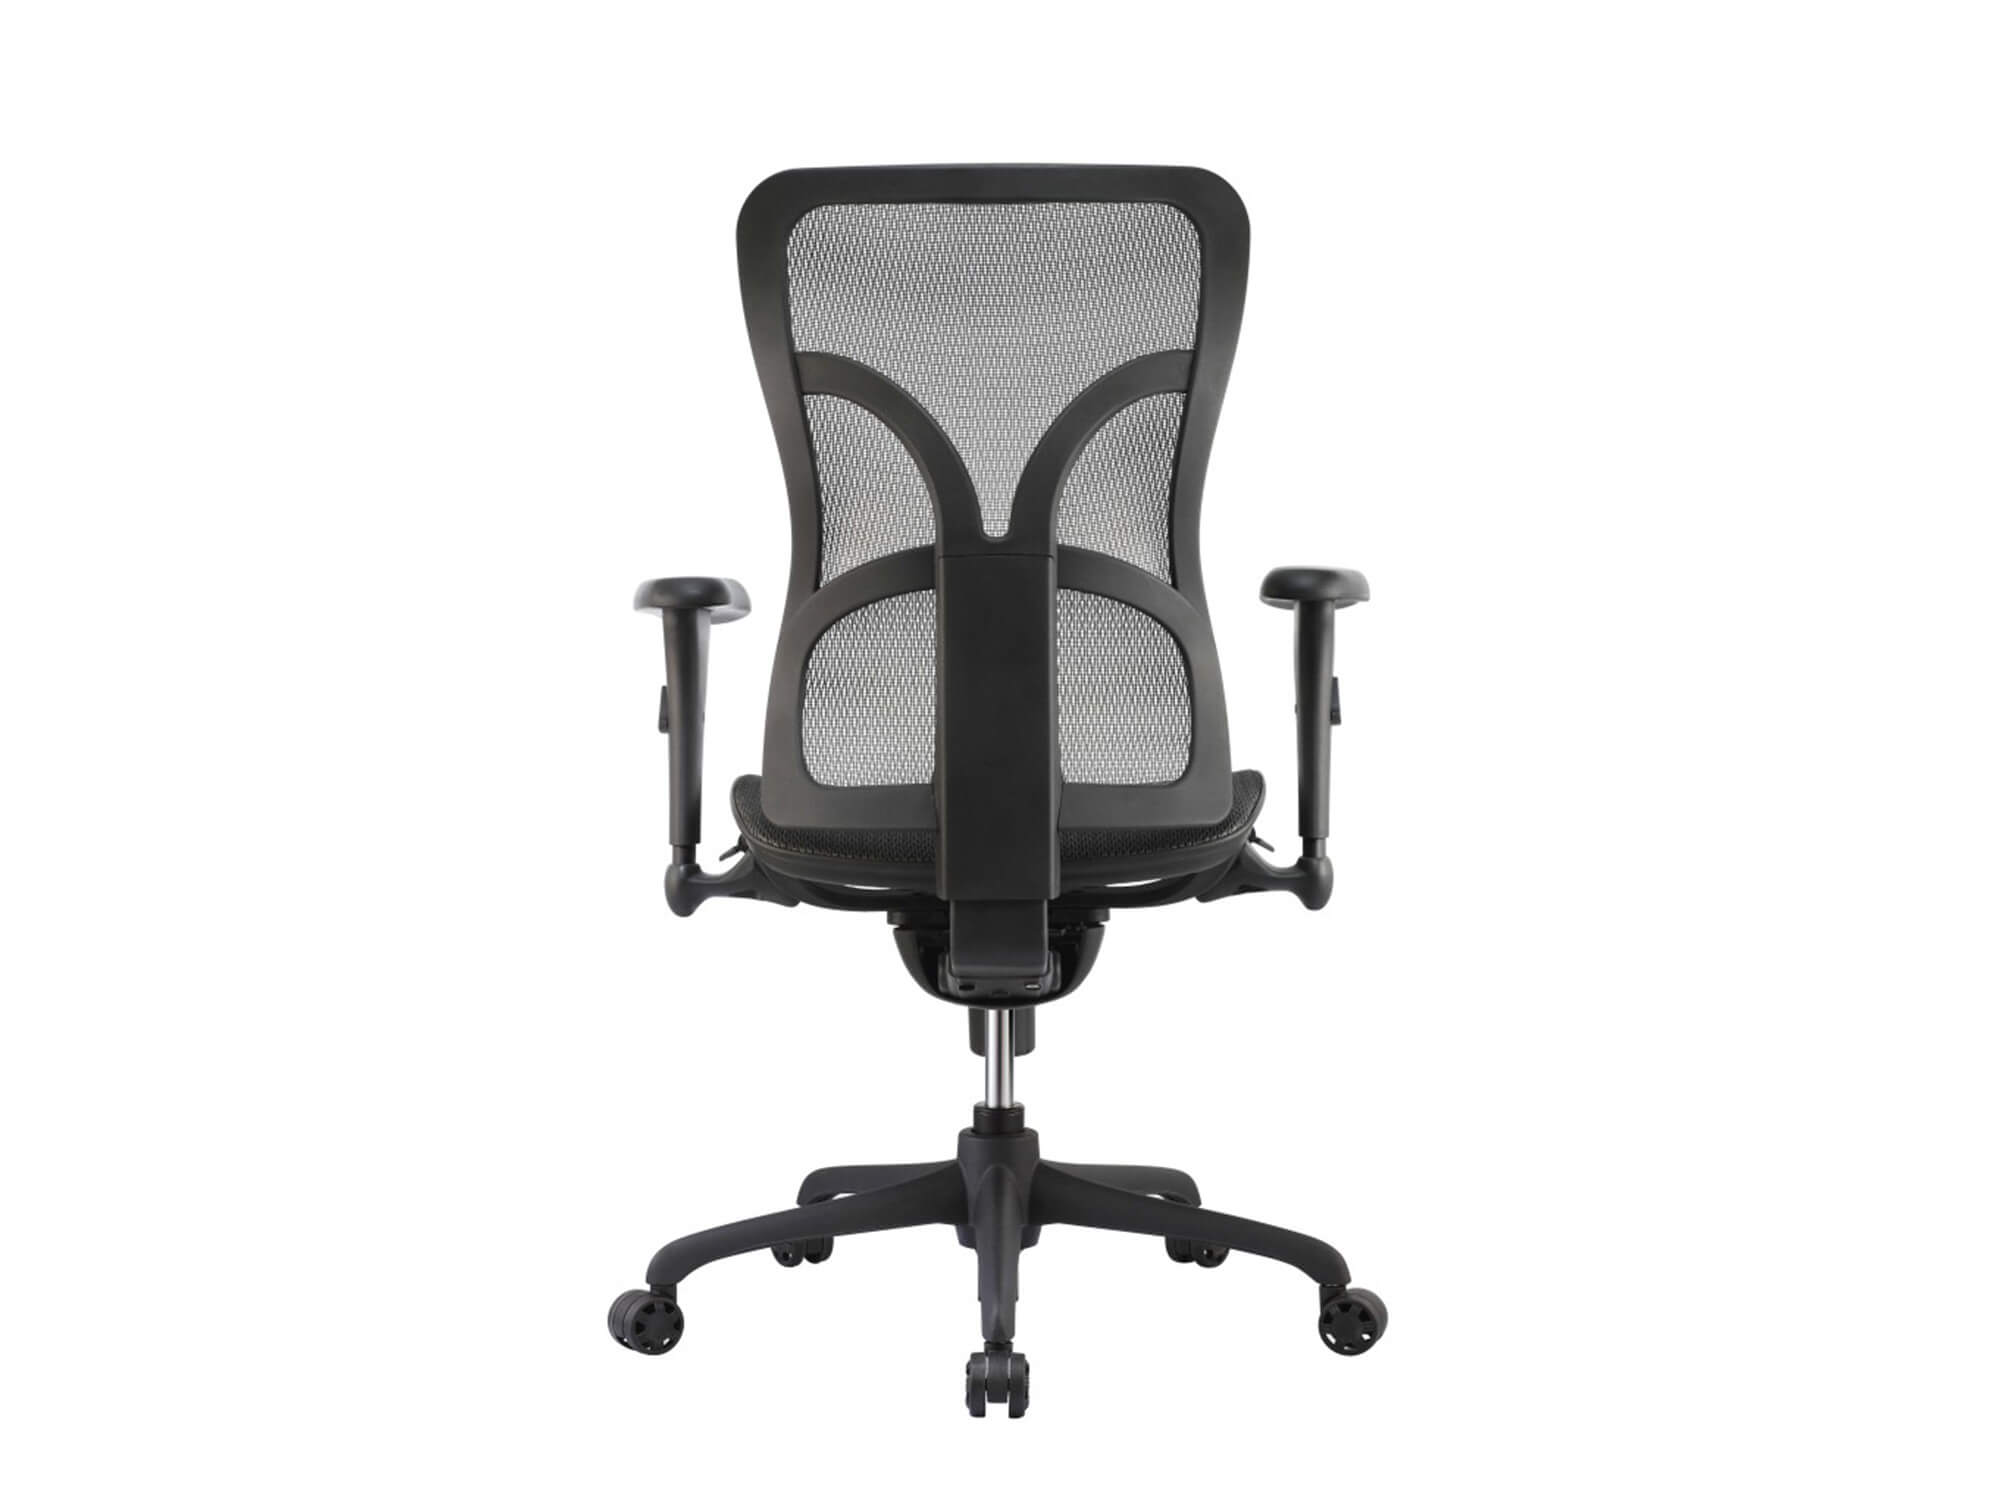 Adjustable office chair back